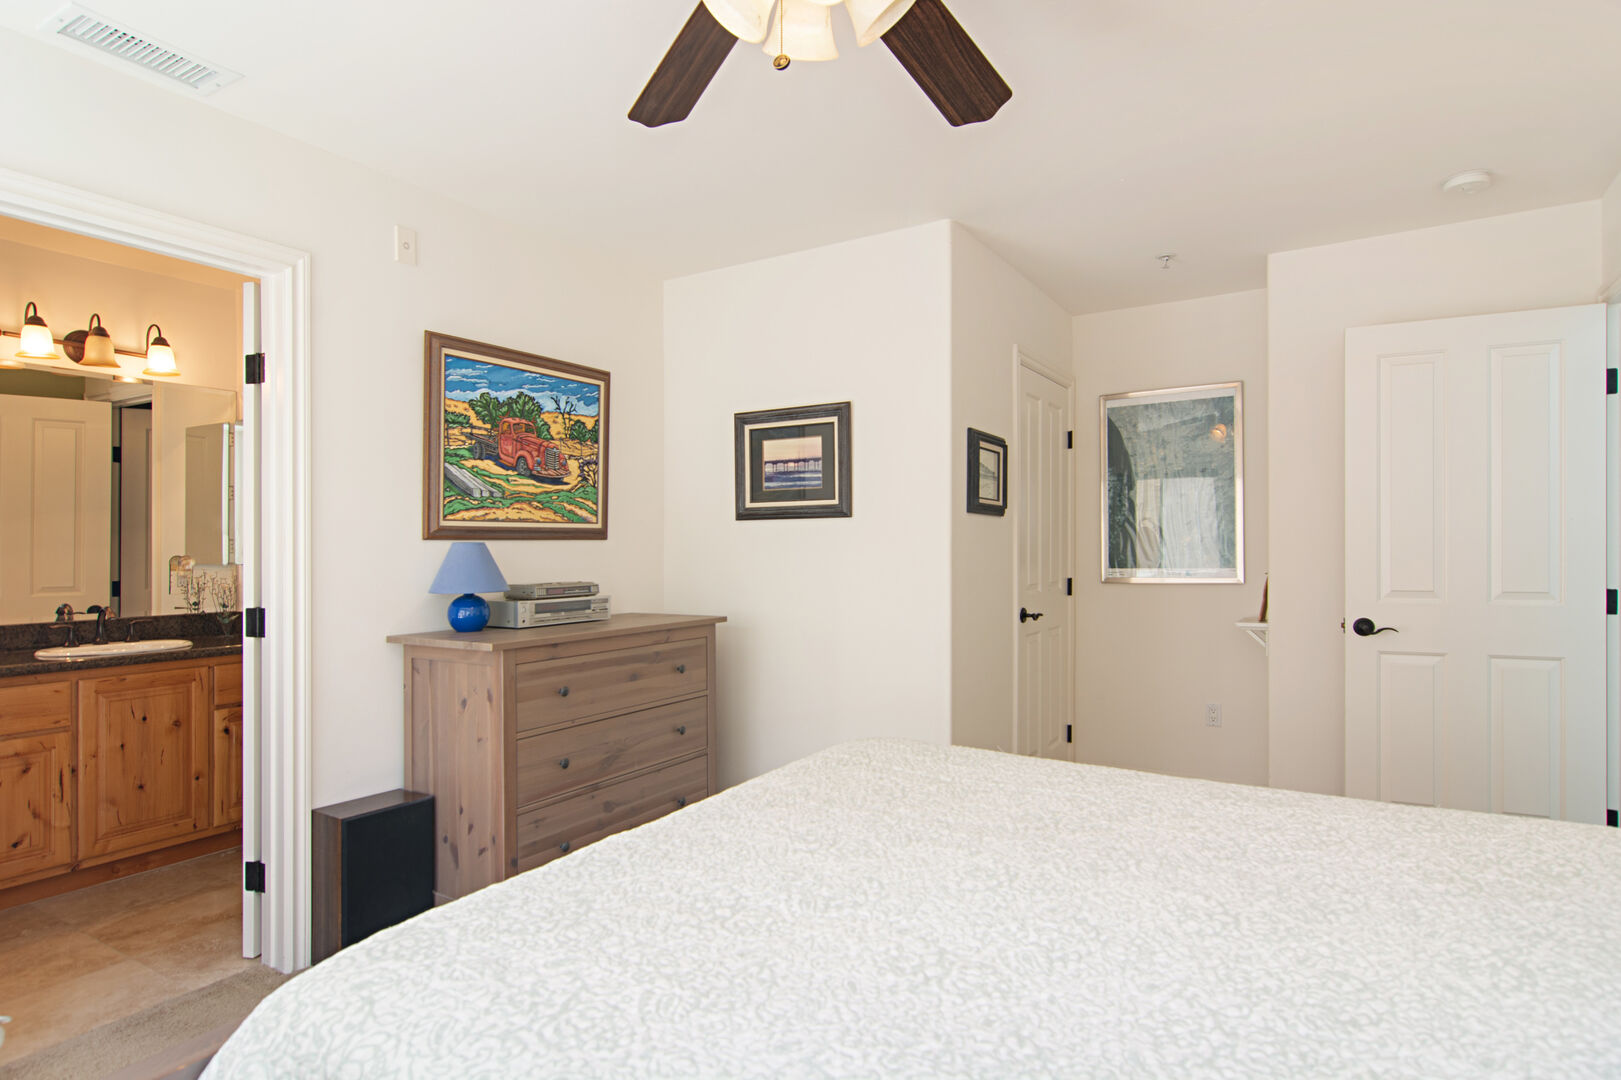 Upstairs master bedroom with queen bed and ceiling fan